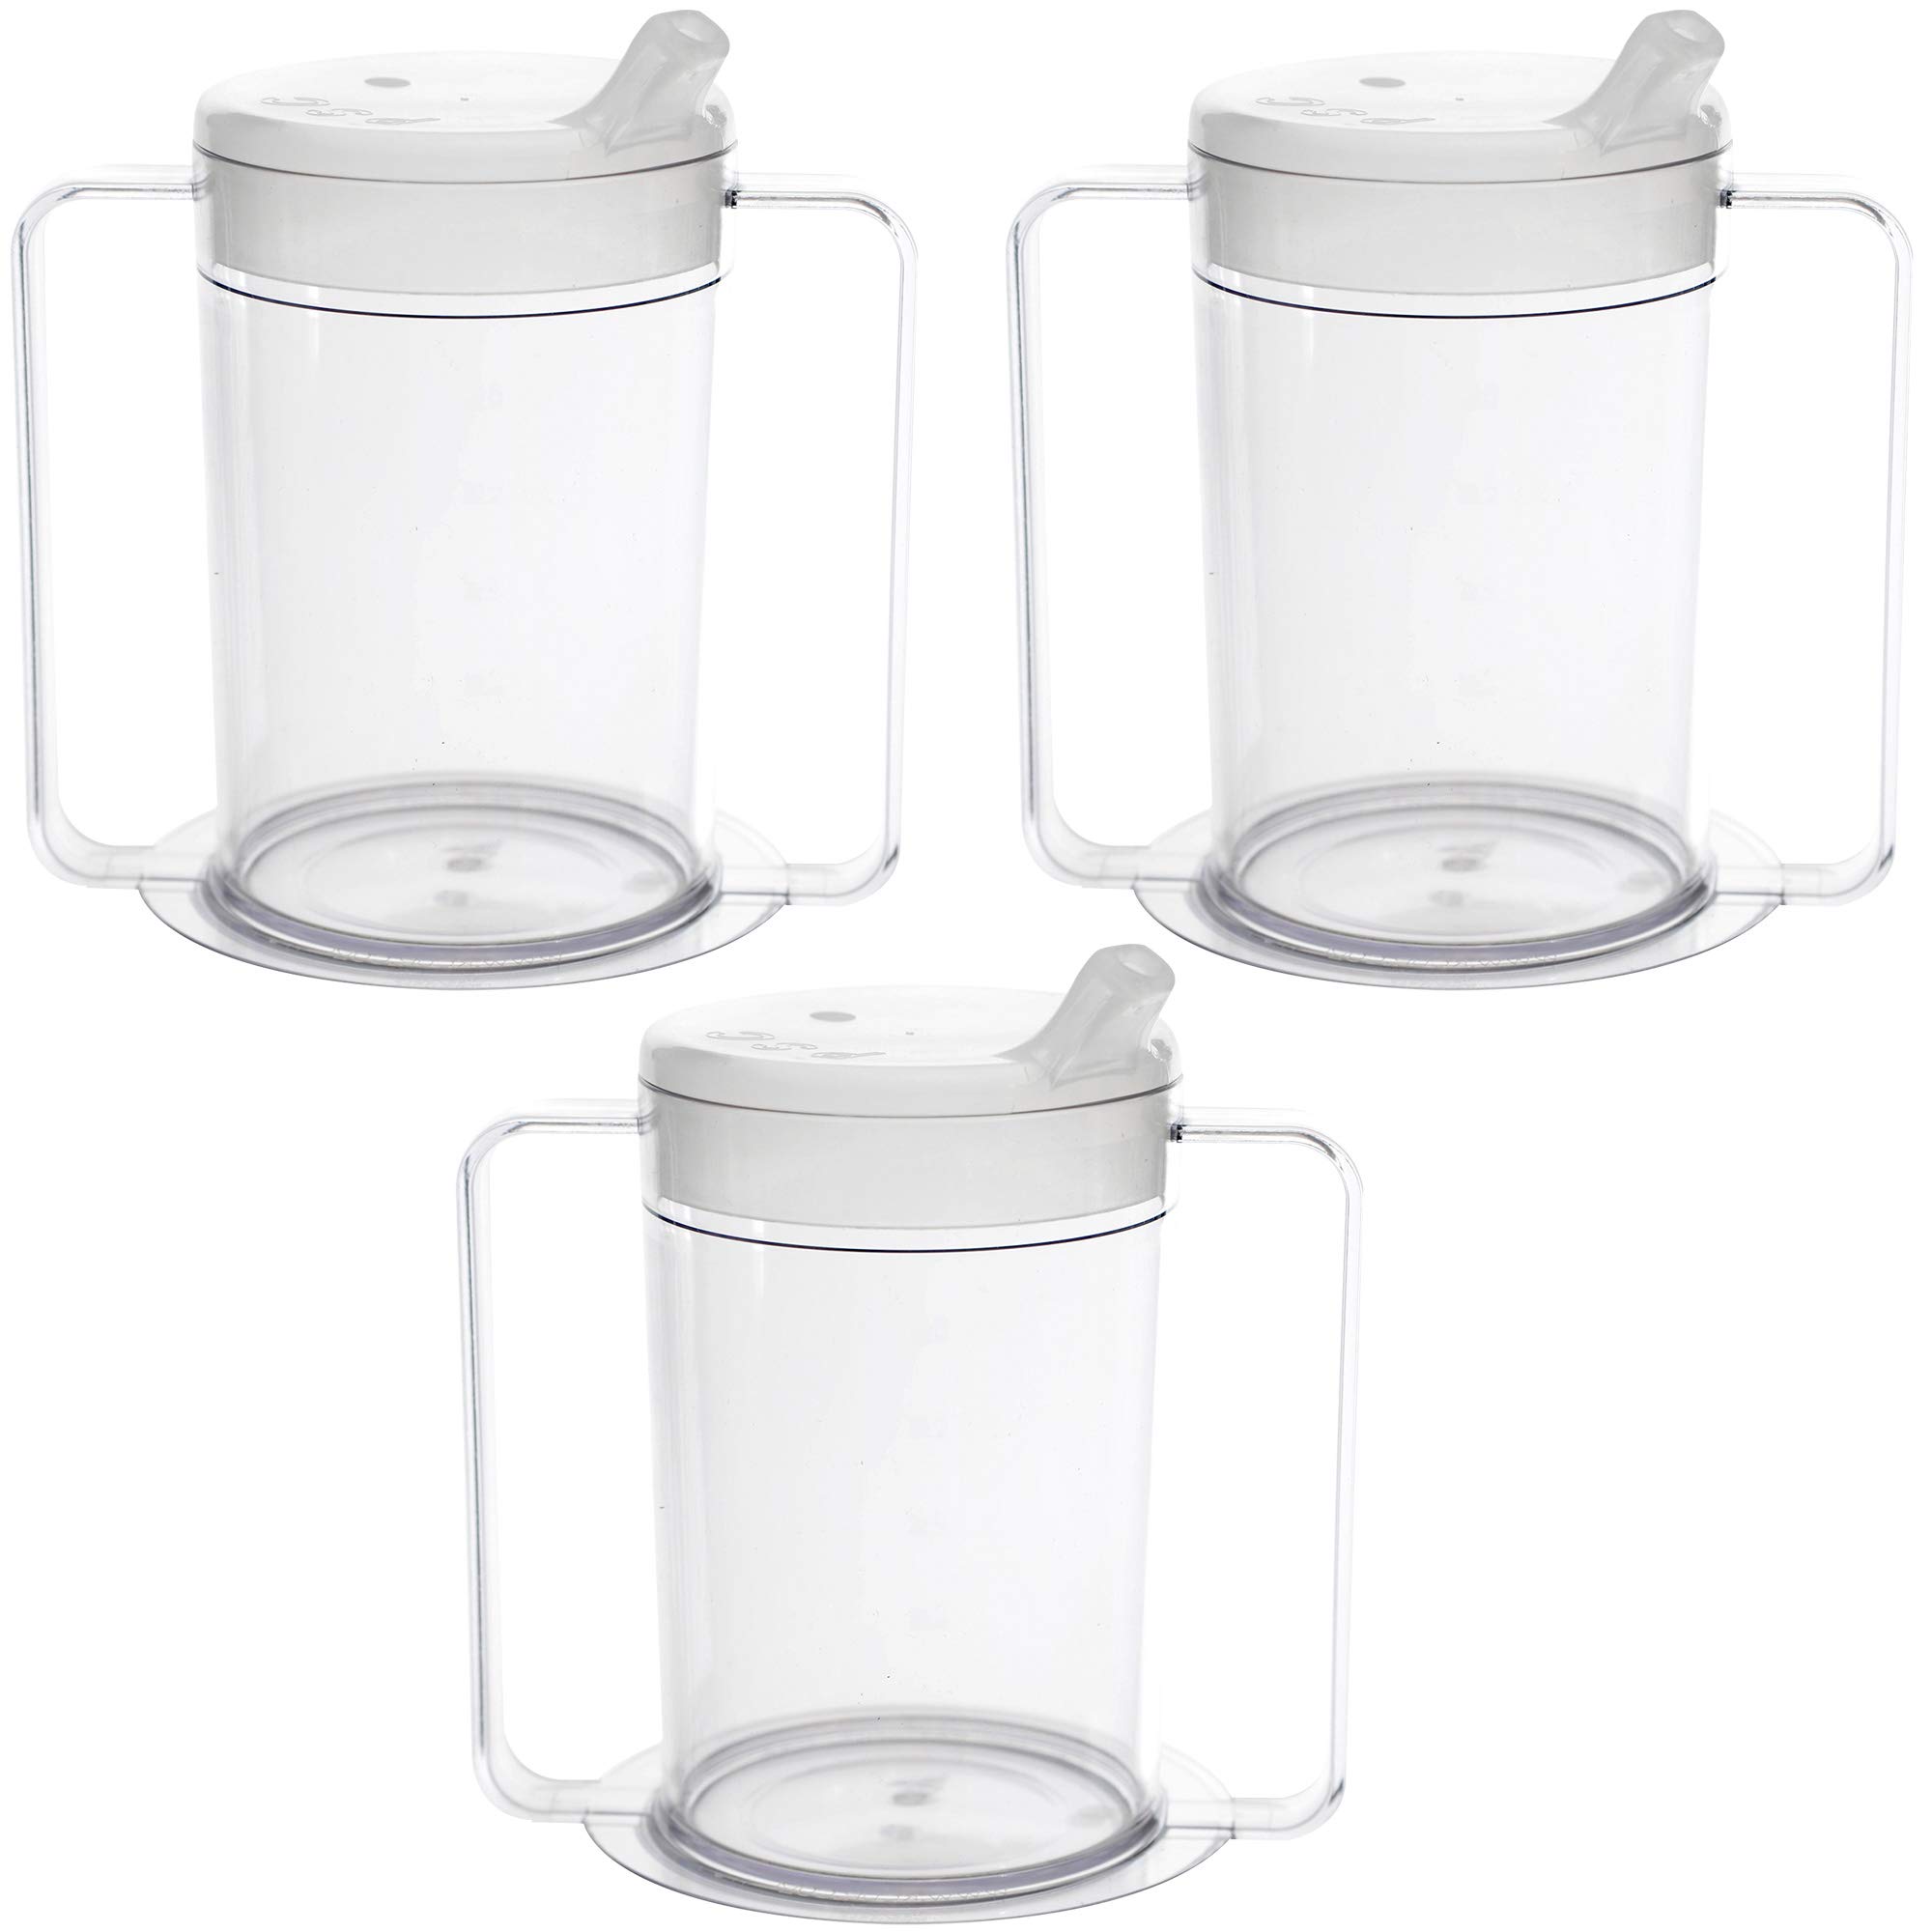 DOITOOL 2PCS Spill Proof Cups for Adults with Two Handles - Plastic Cups  with Lids and Straws for Ad…See more DOITOOL 2PCS Spill Proof Cups for  Adults